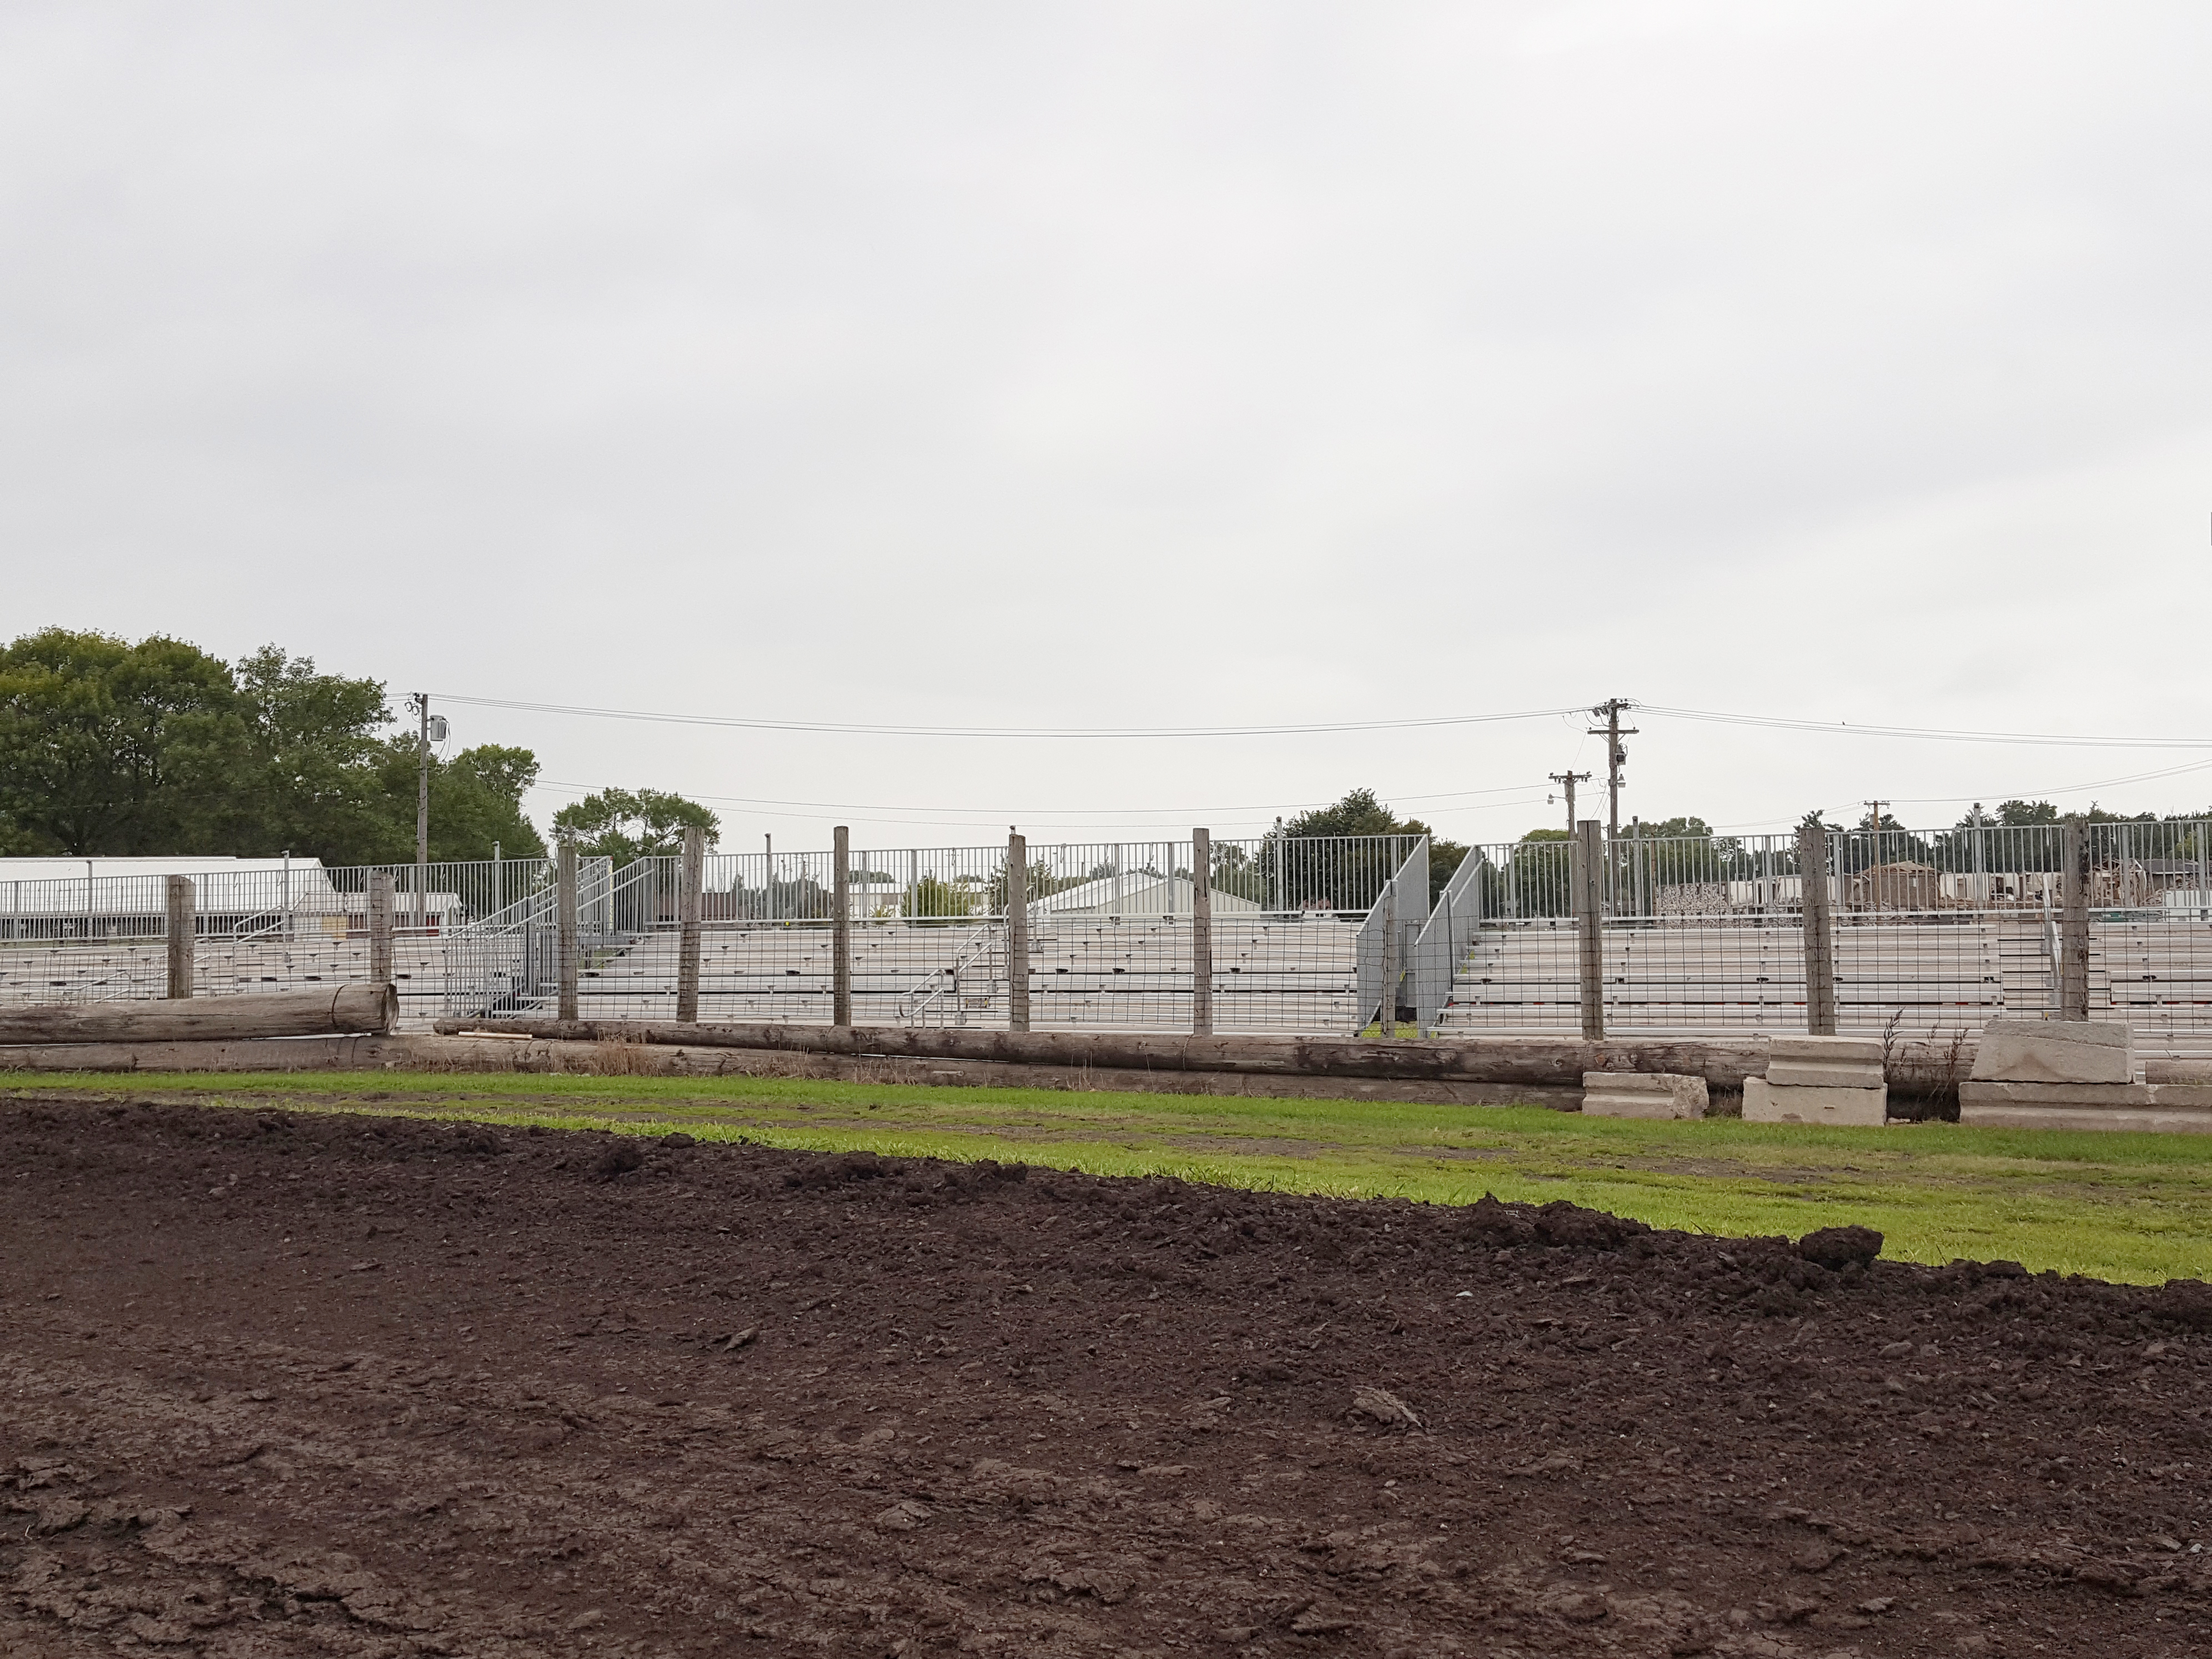 Additional seating with towable bleachers at Benton County Speedway in Vinton, IA